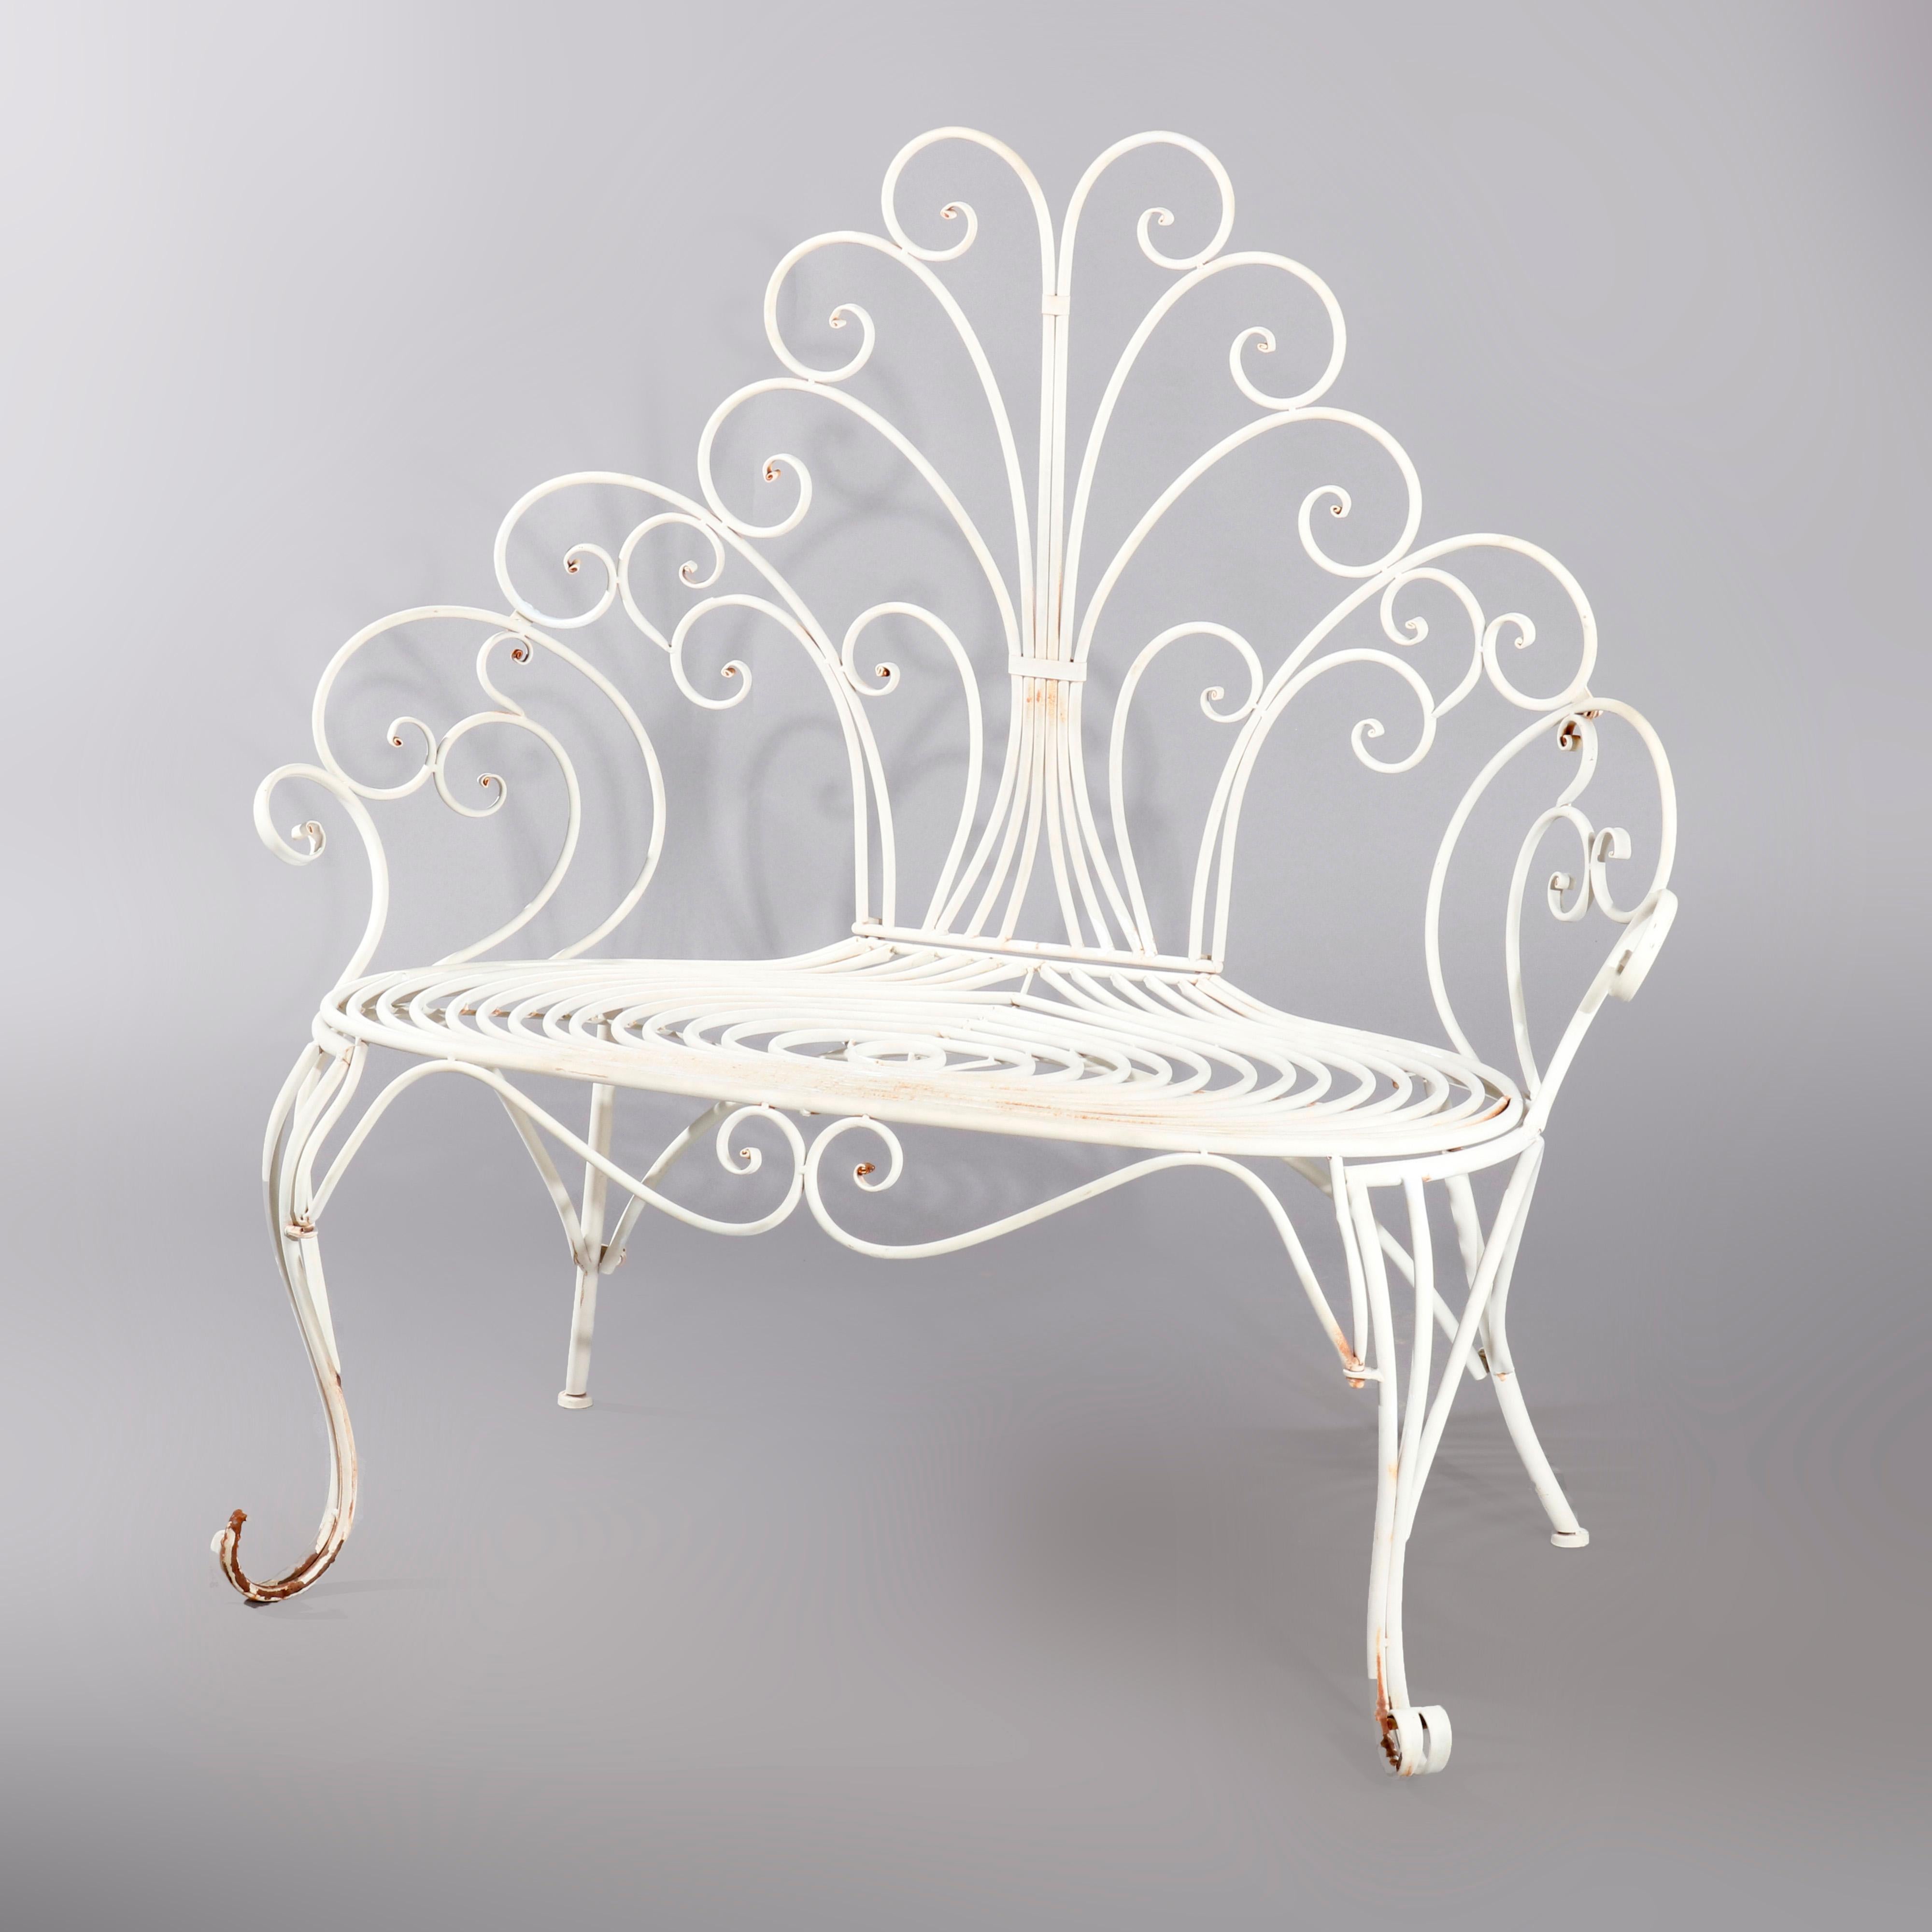 A contemporary Victorian style garden bench offers wire construction with scrolled high back and arms, raised on cabriole legs terminating in scrolled feet, painted white, 20th century

Measures: 46